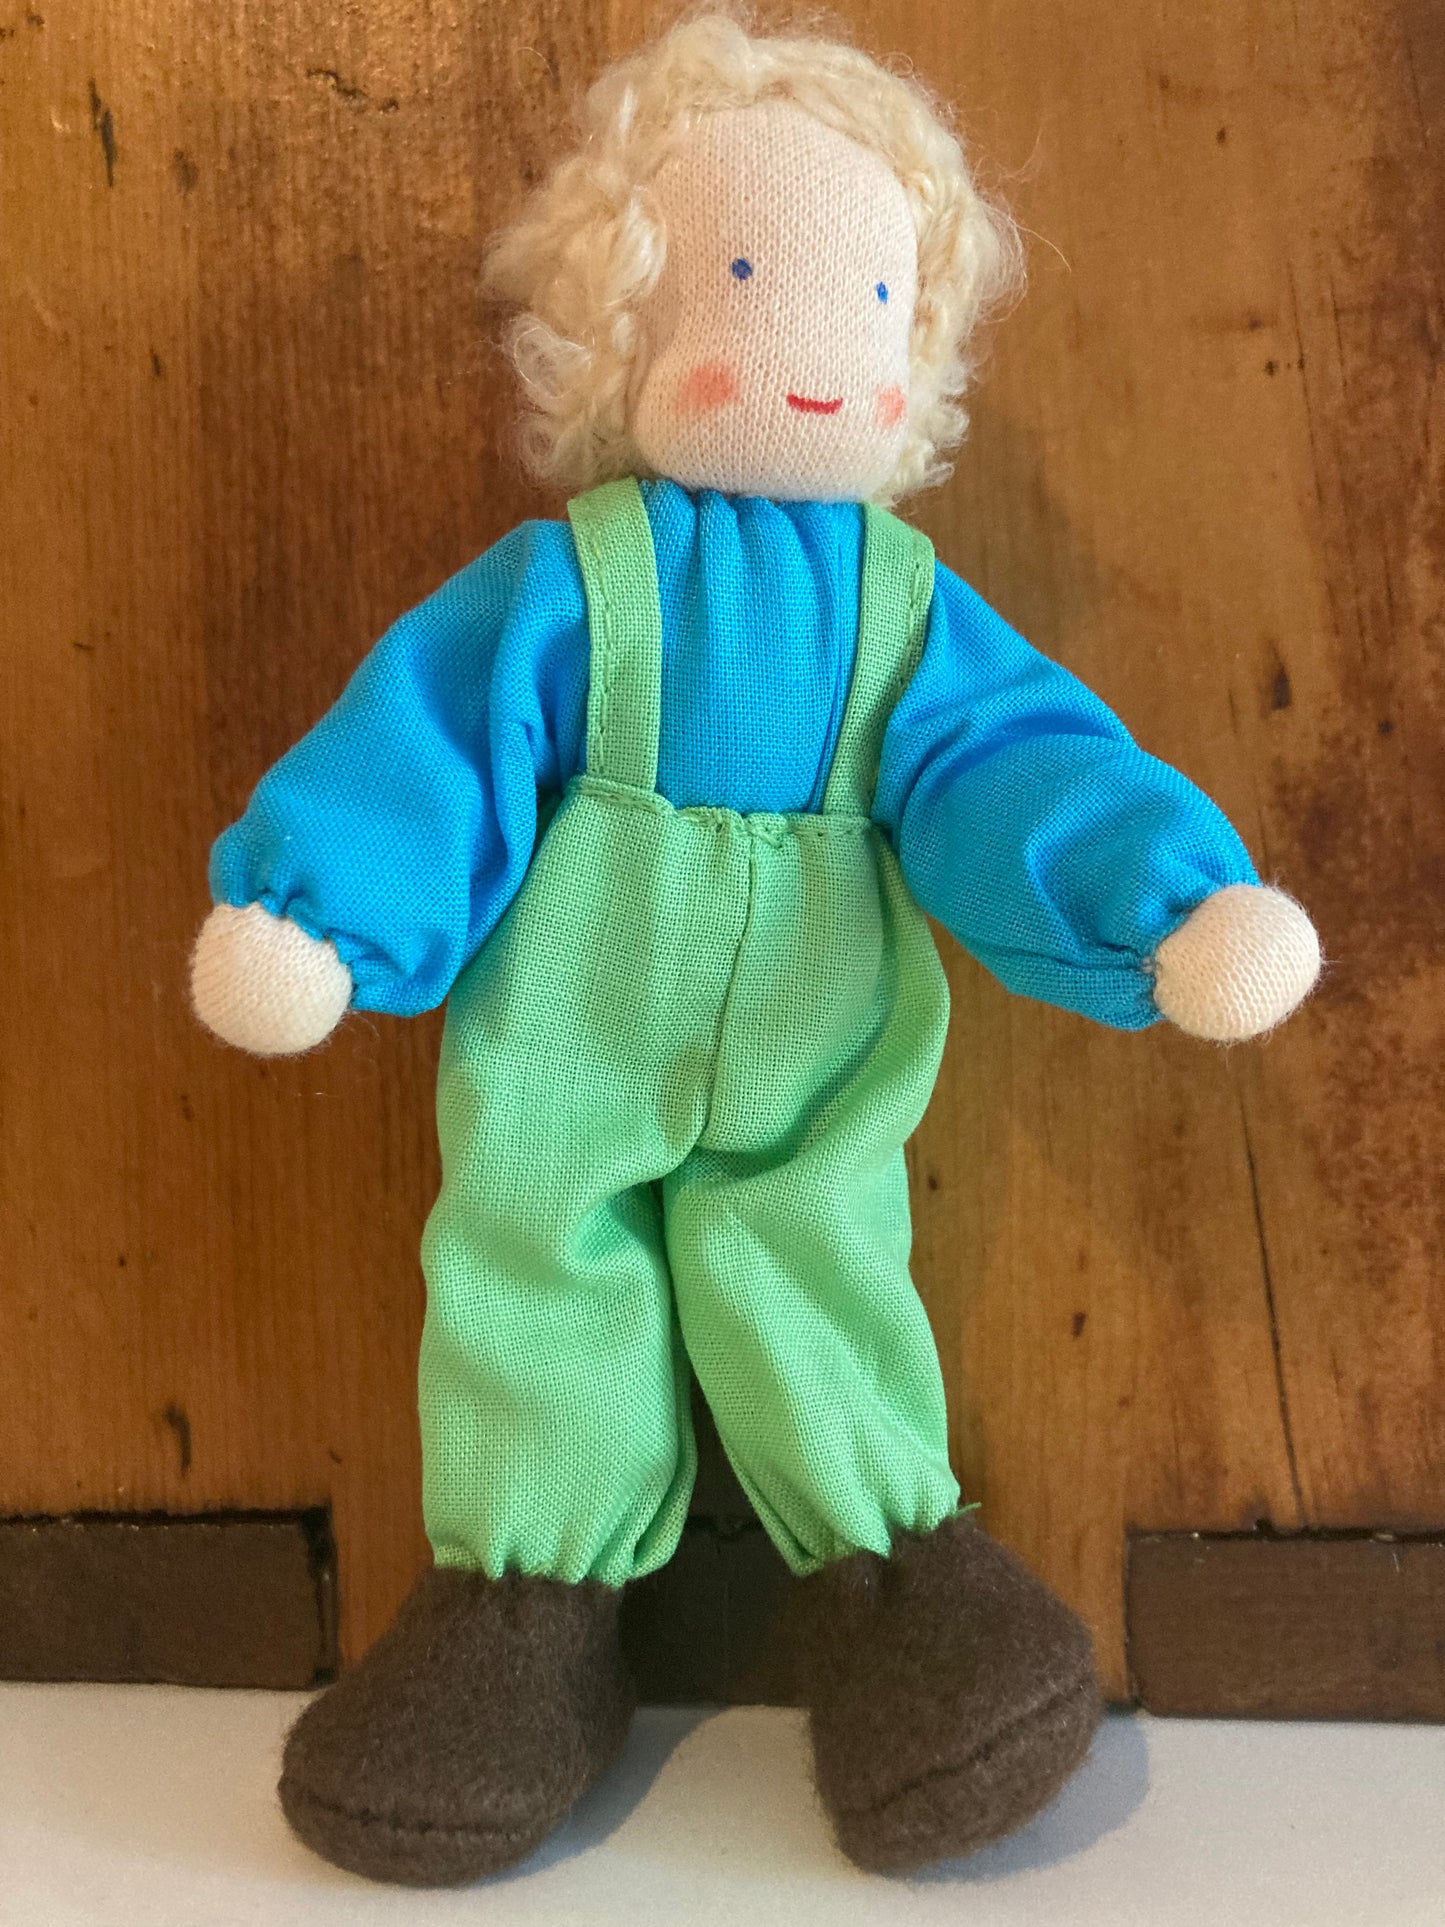 Dollhouse Waldorf Doll - Grimm's LIME CHILD in PANTS